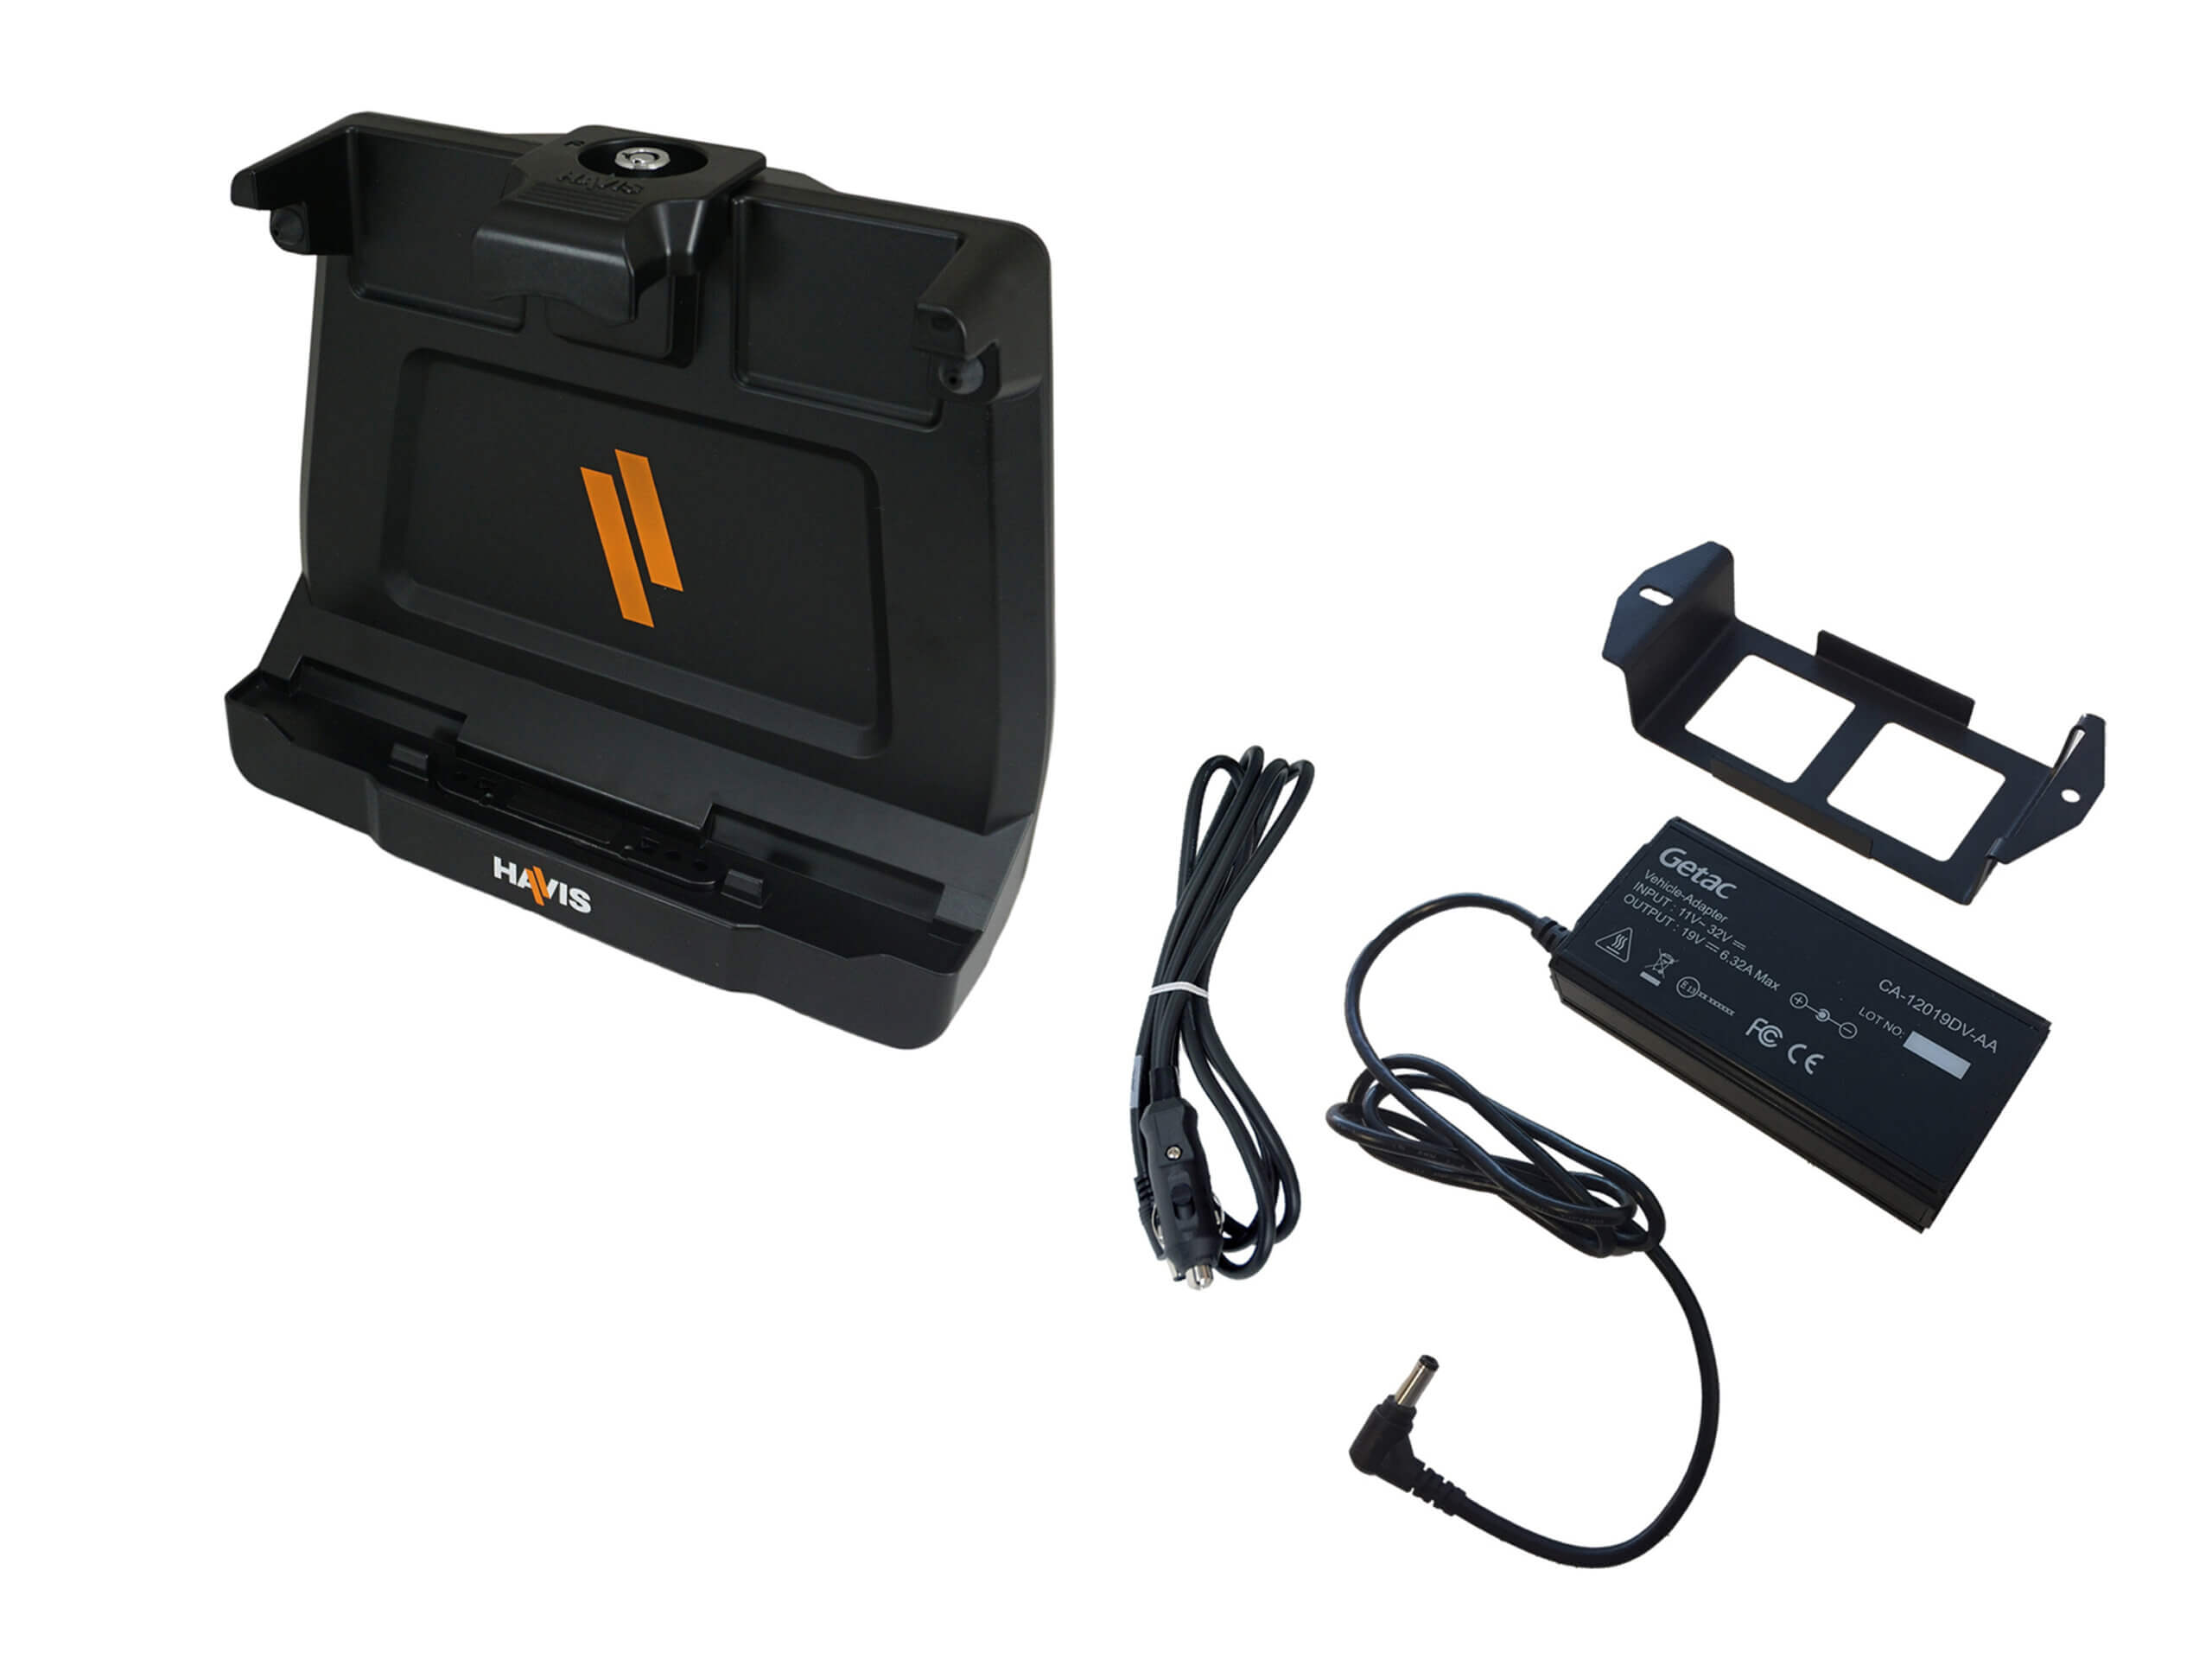 Cradle For Getac ZX10 Tablet With External Power Supply